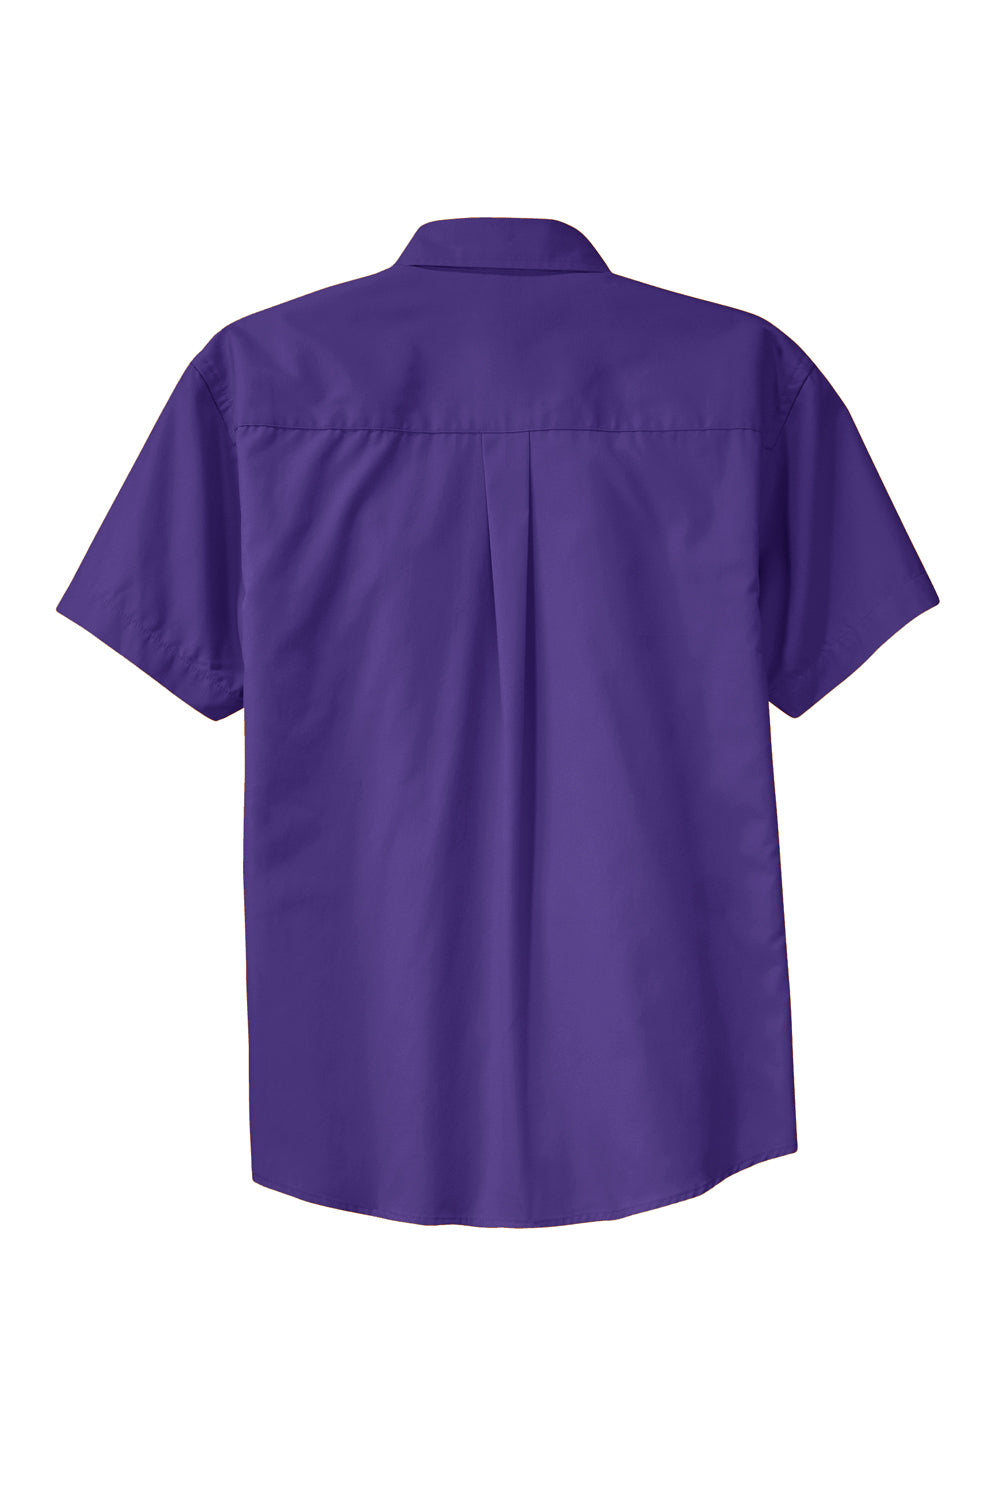 Port Authority S508/TLS508 Mens Easy Care Wrinkle Resistant Short Sleeve Button Down Shirt w/ Pocket Purple Flat Back